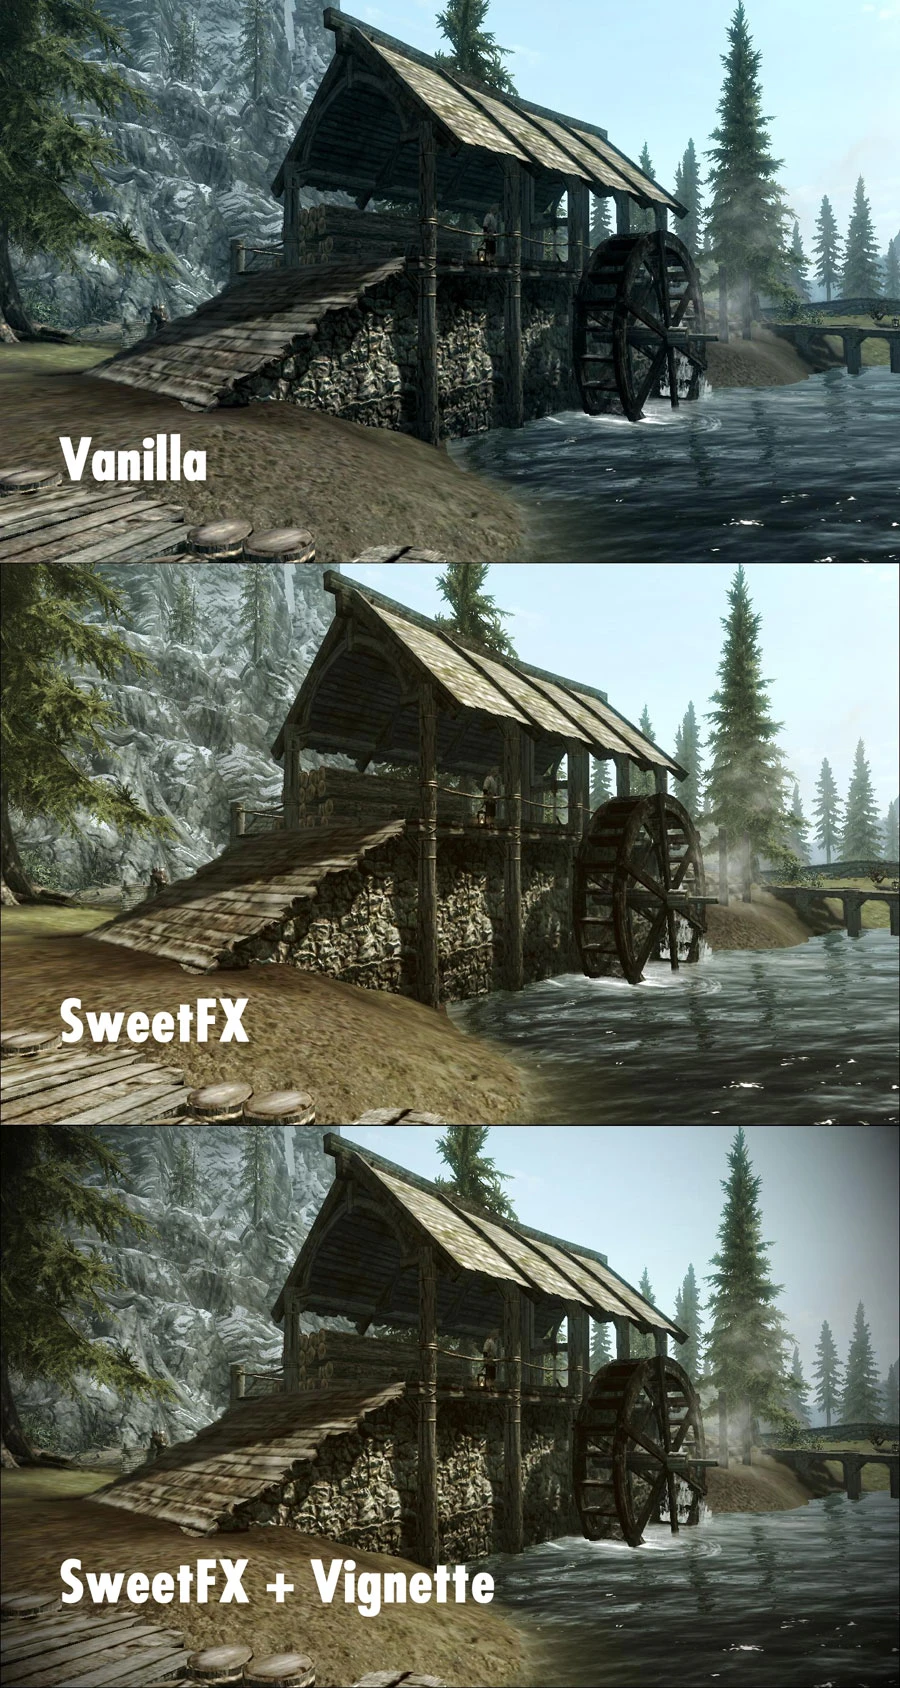 skyrim sweetfx how to